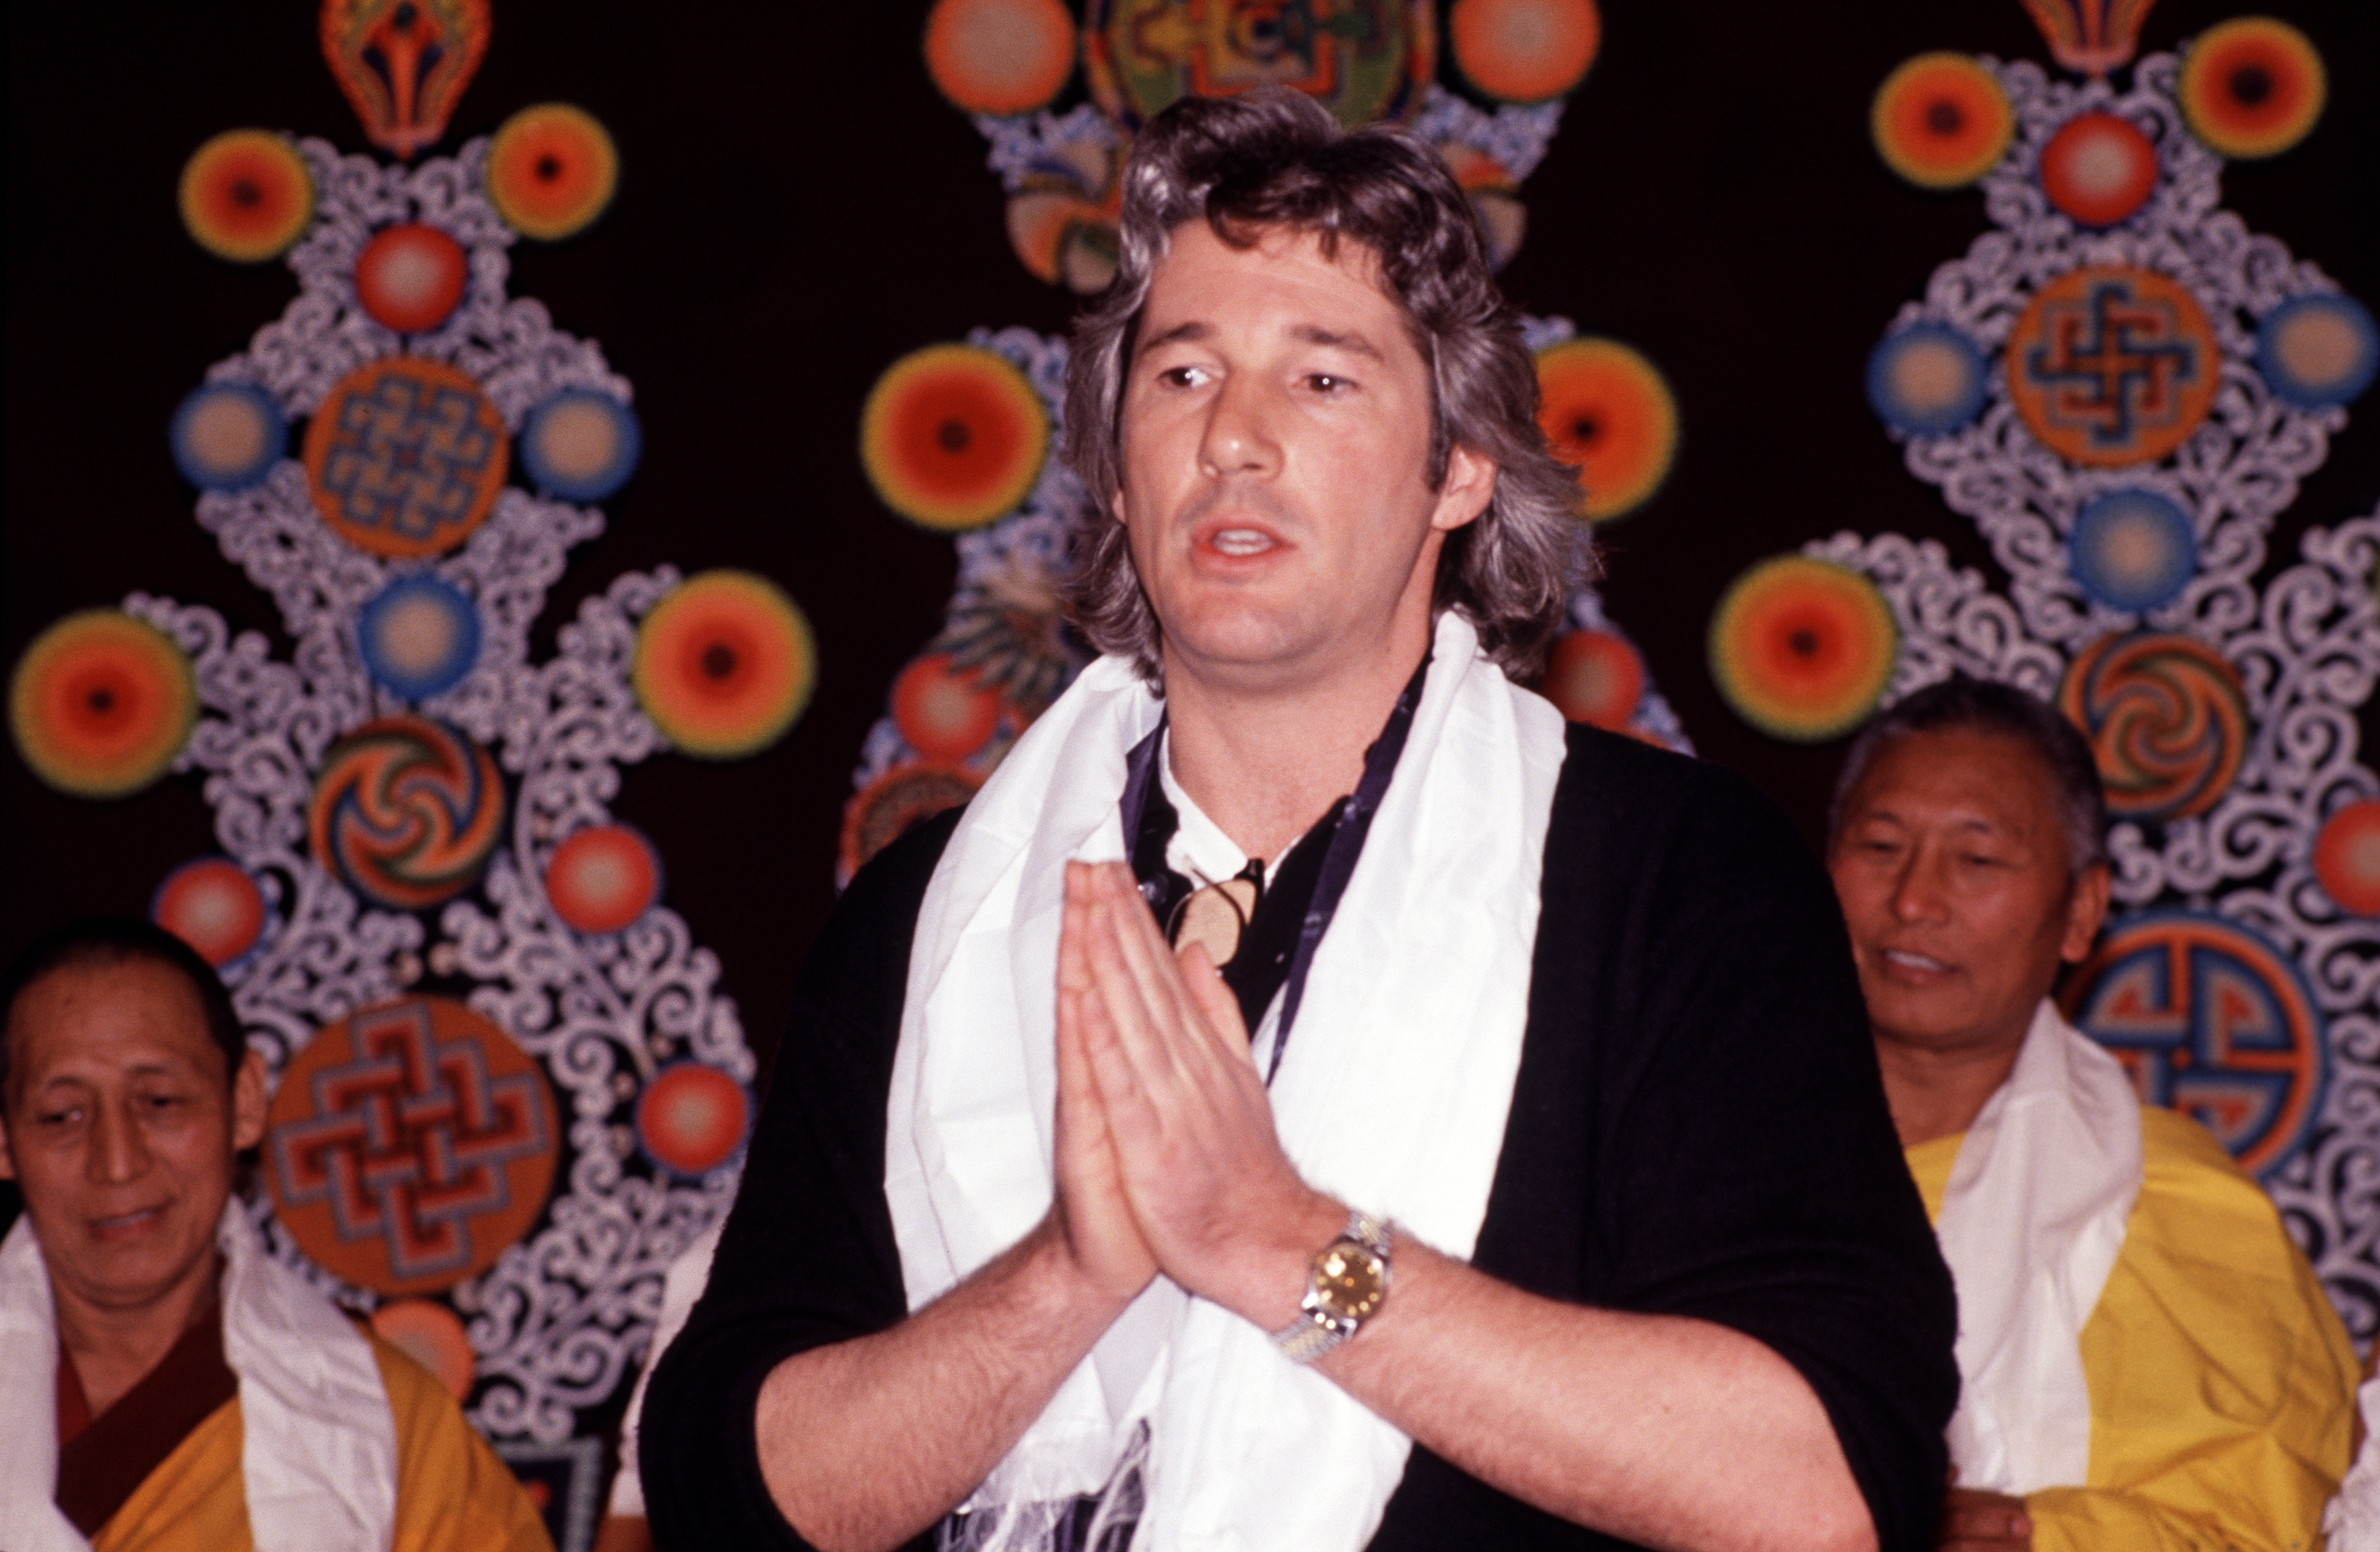 Richard Gere with Indian monks during a demonstration in New York City on February 24, 1989 | Source: Getty Images